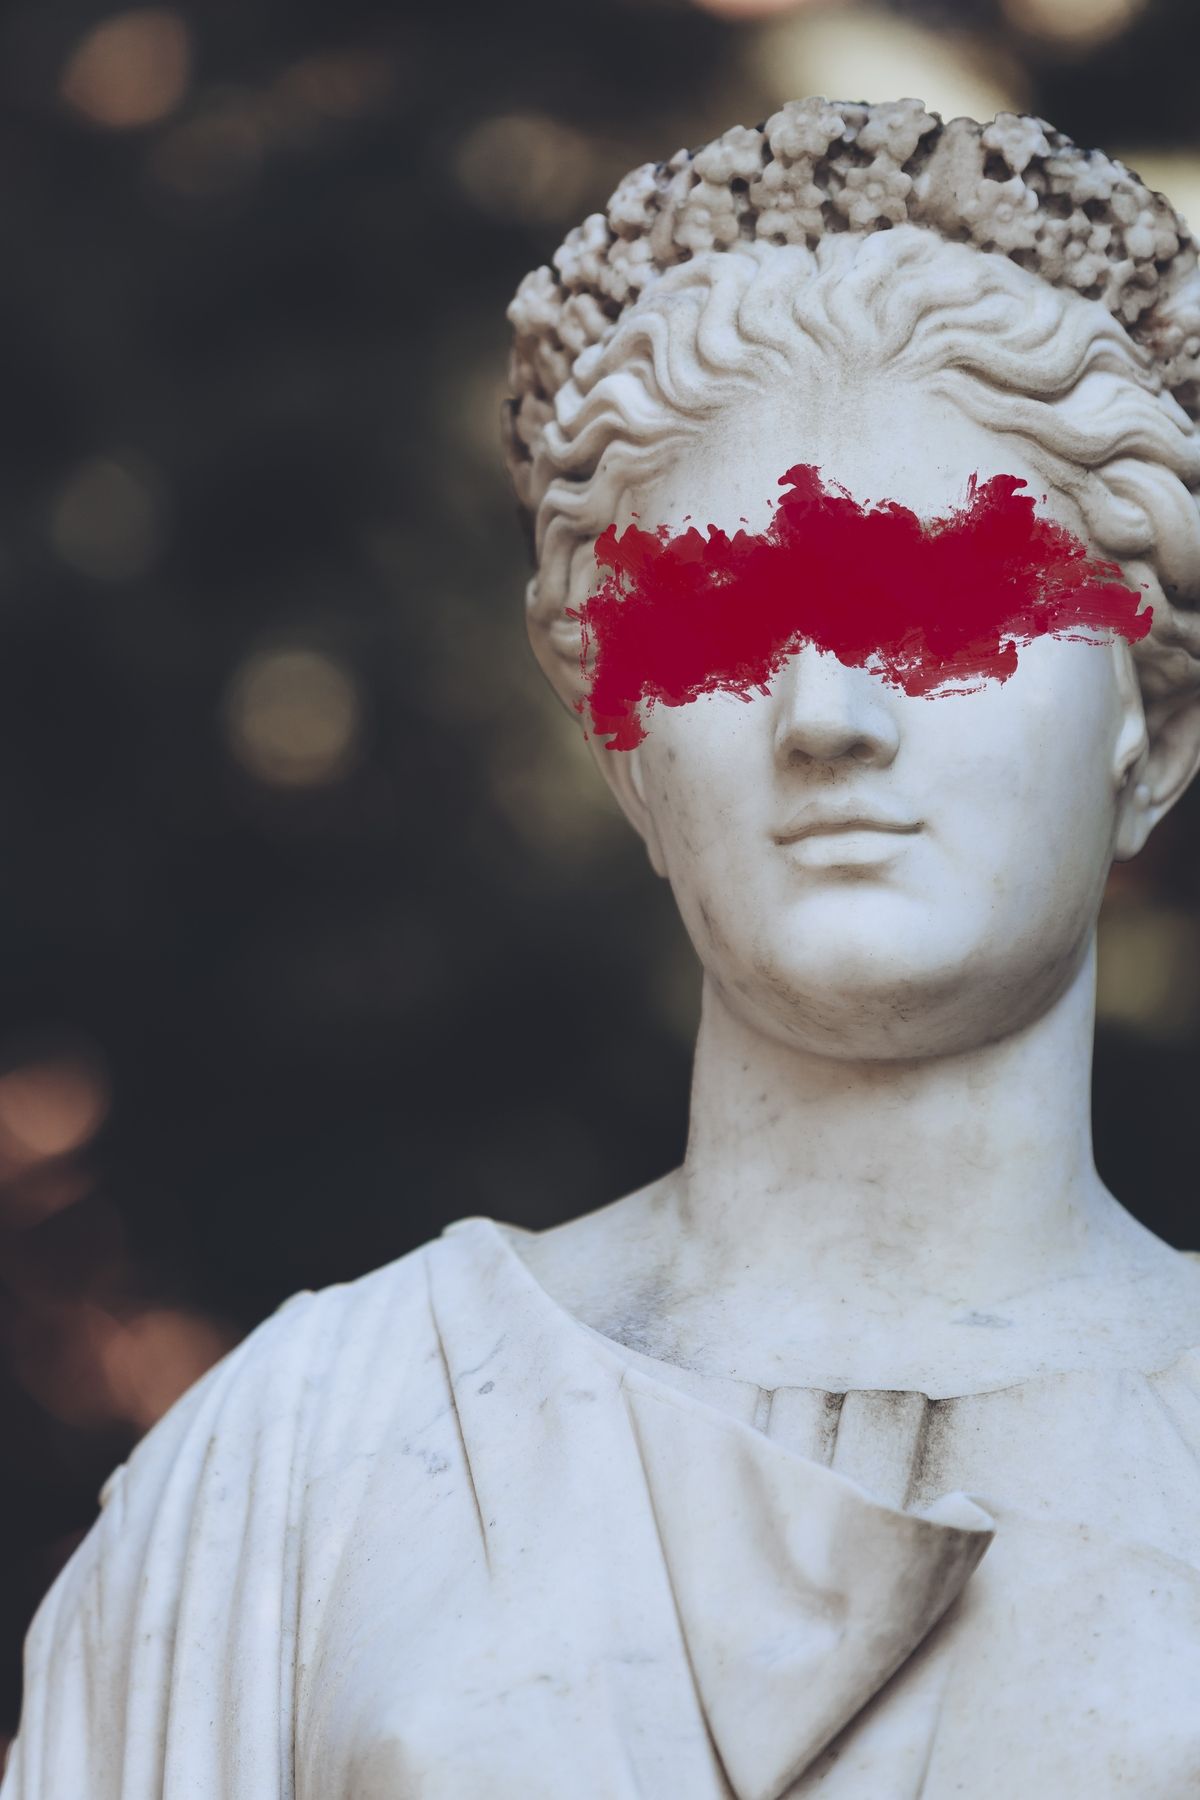 A statue with red paint over its eyes. - Greek statue